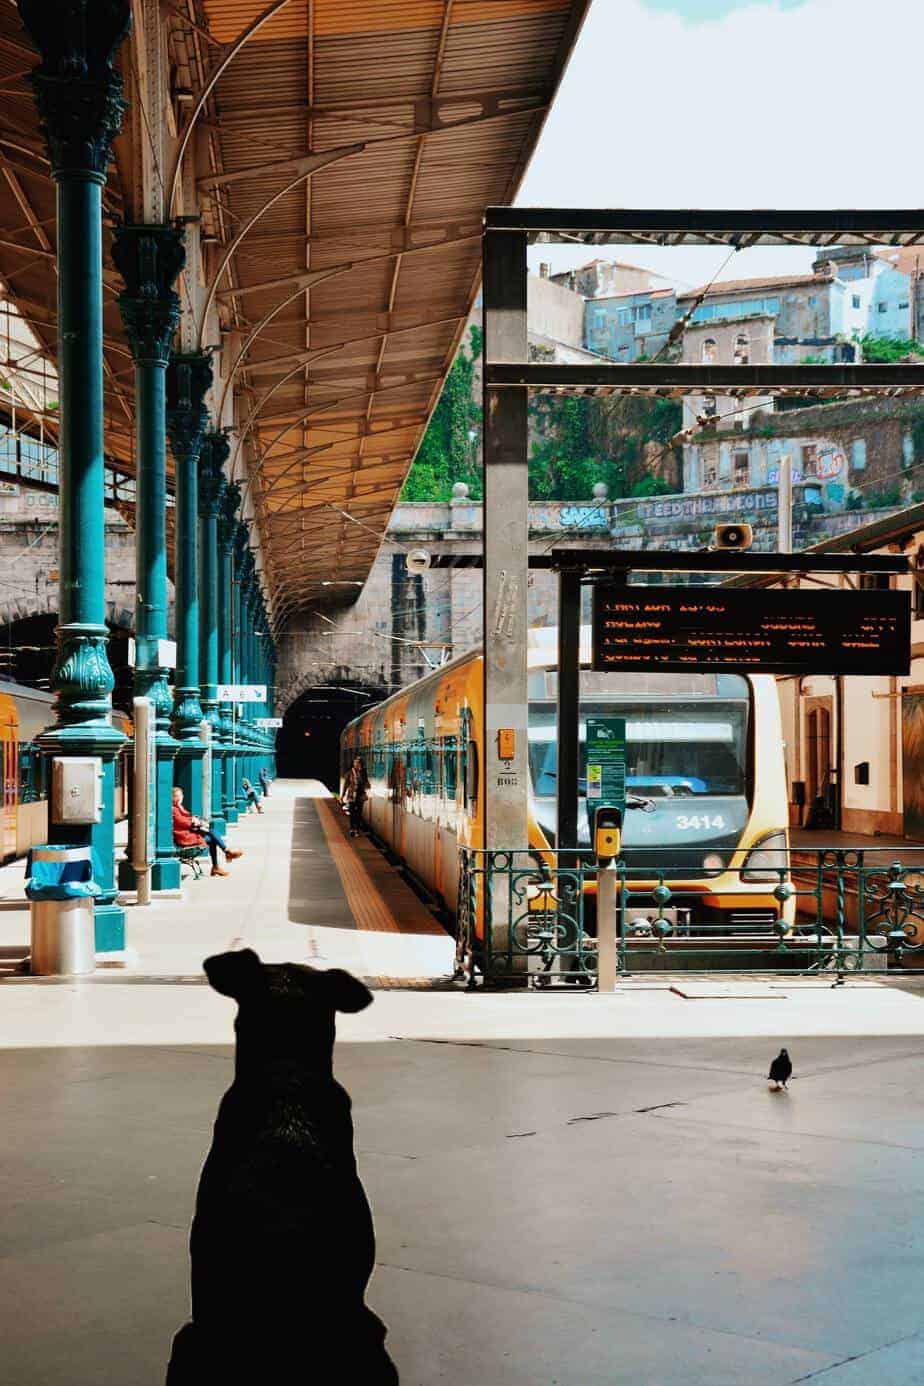 Black Labrador retriever waits for a train. Travel companies, airlines, and accommodation options are becoming increasingly pet-friendly and provide options for budget-friendly travel with dogs.